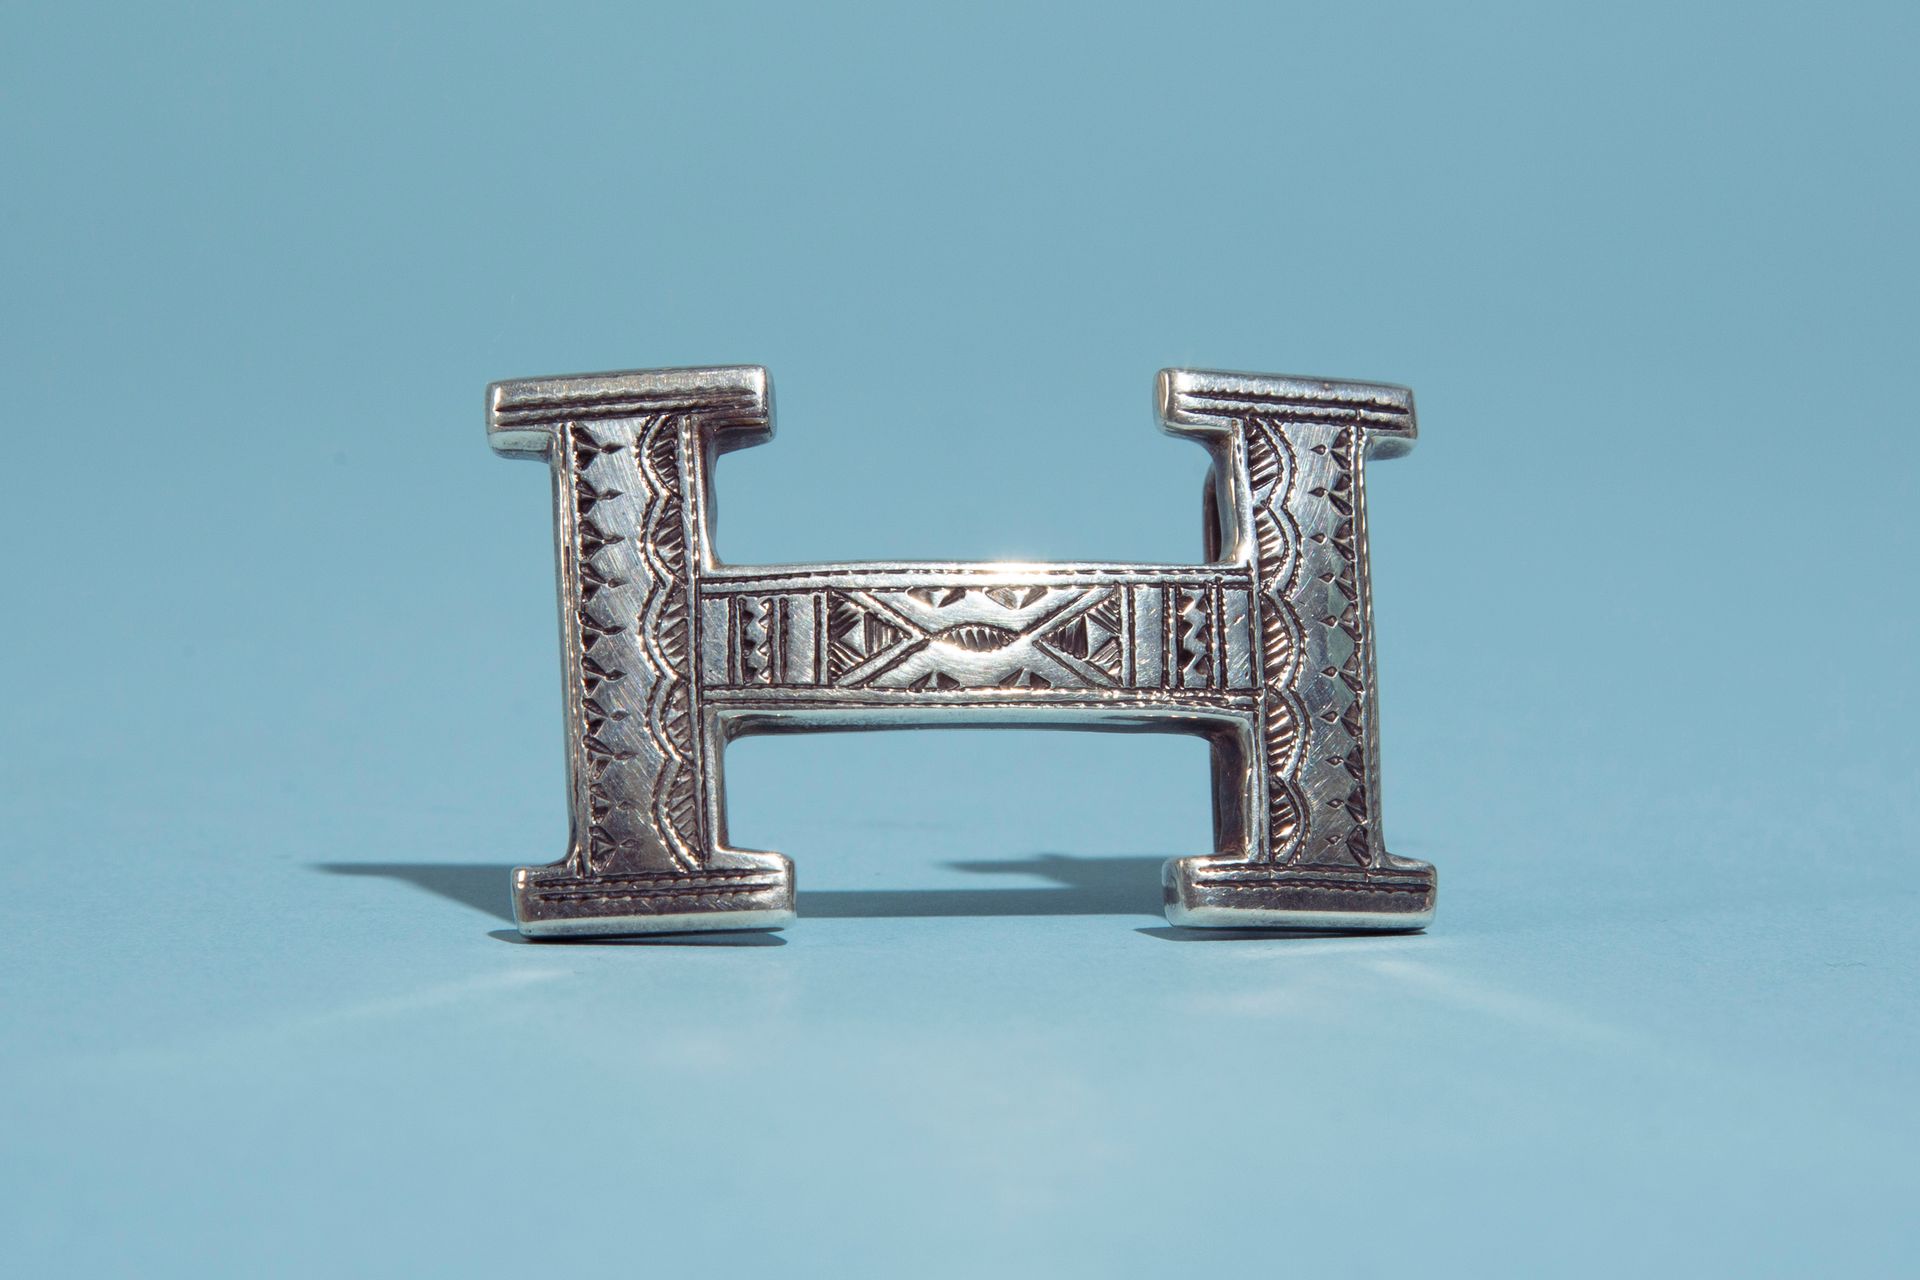 Null HERMÈS.

Belt buckle "Constance" in silver 950 thousandth with engraved dec&hellip;